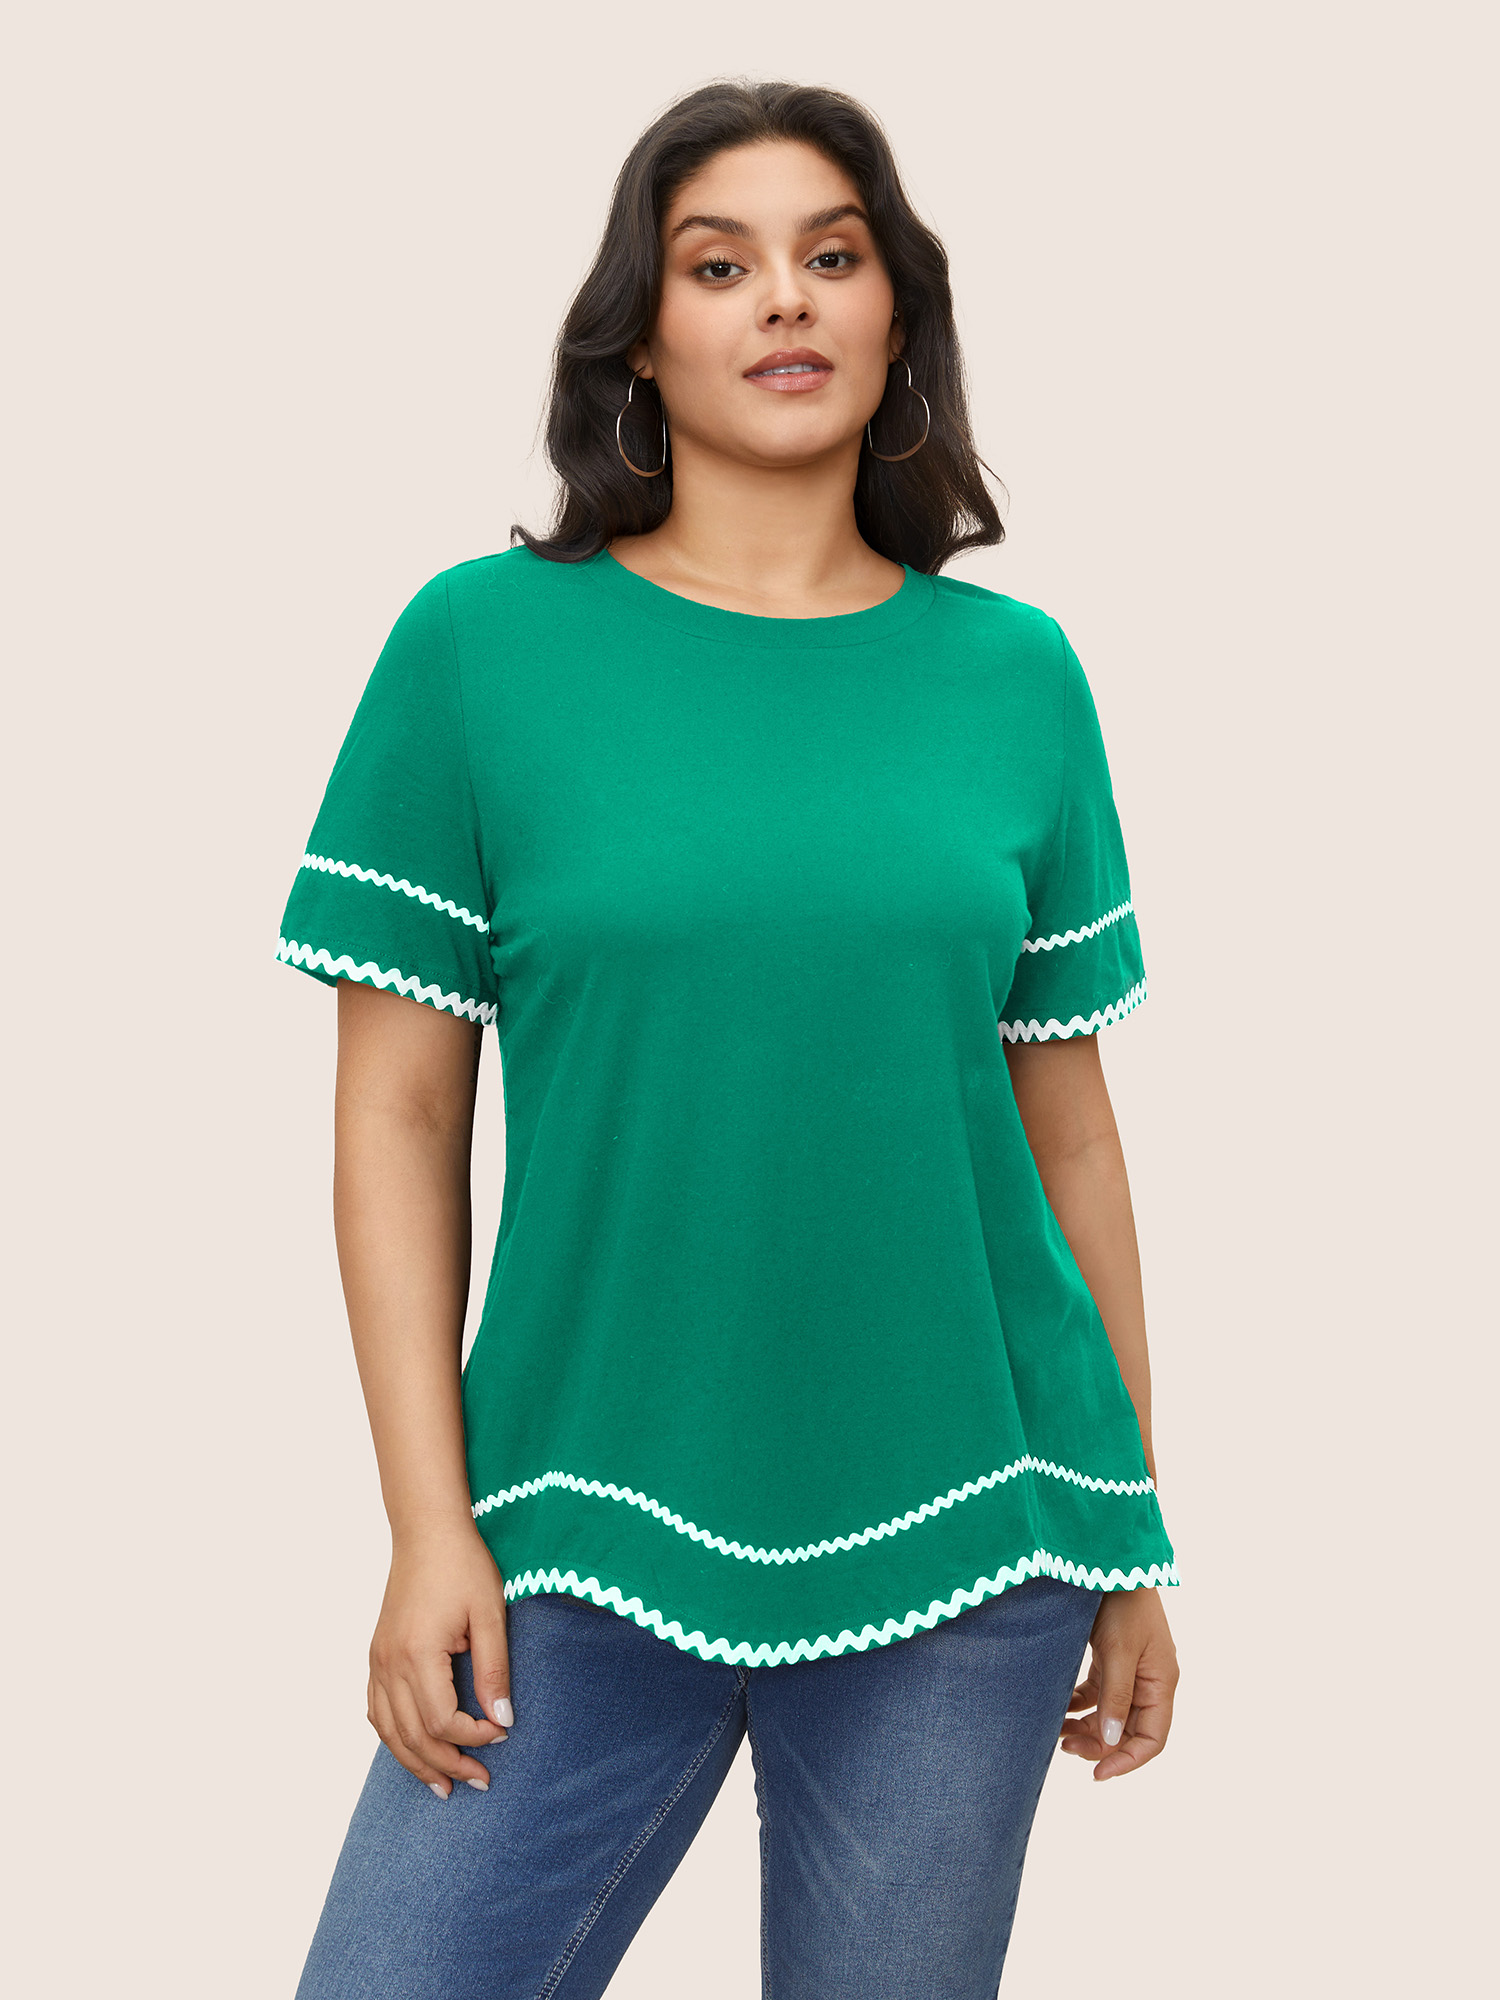 

Plus Size Cotton Contrast Trim Round Neck T-shirt Teal Women Casual Contrast Round Neck Everyday T-shirts BloomChic